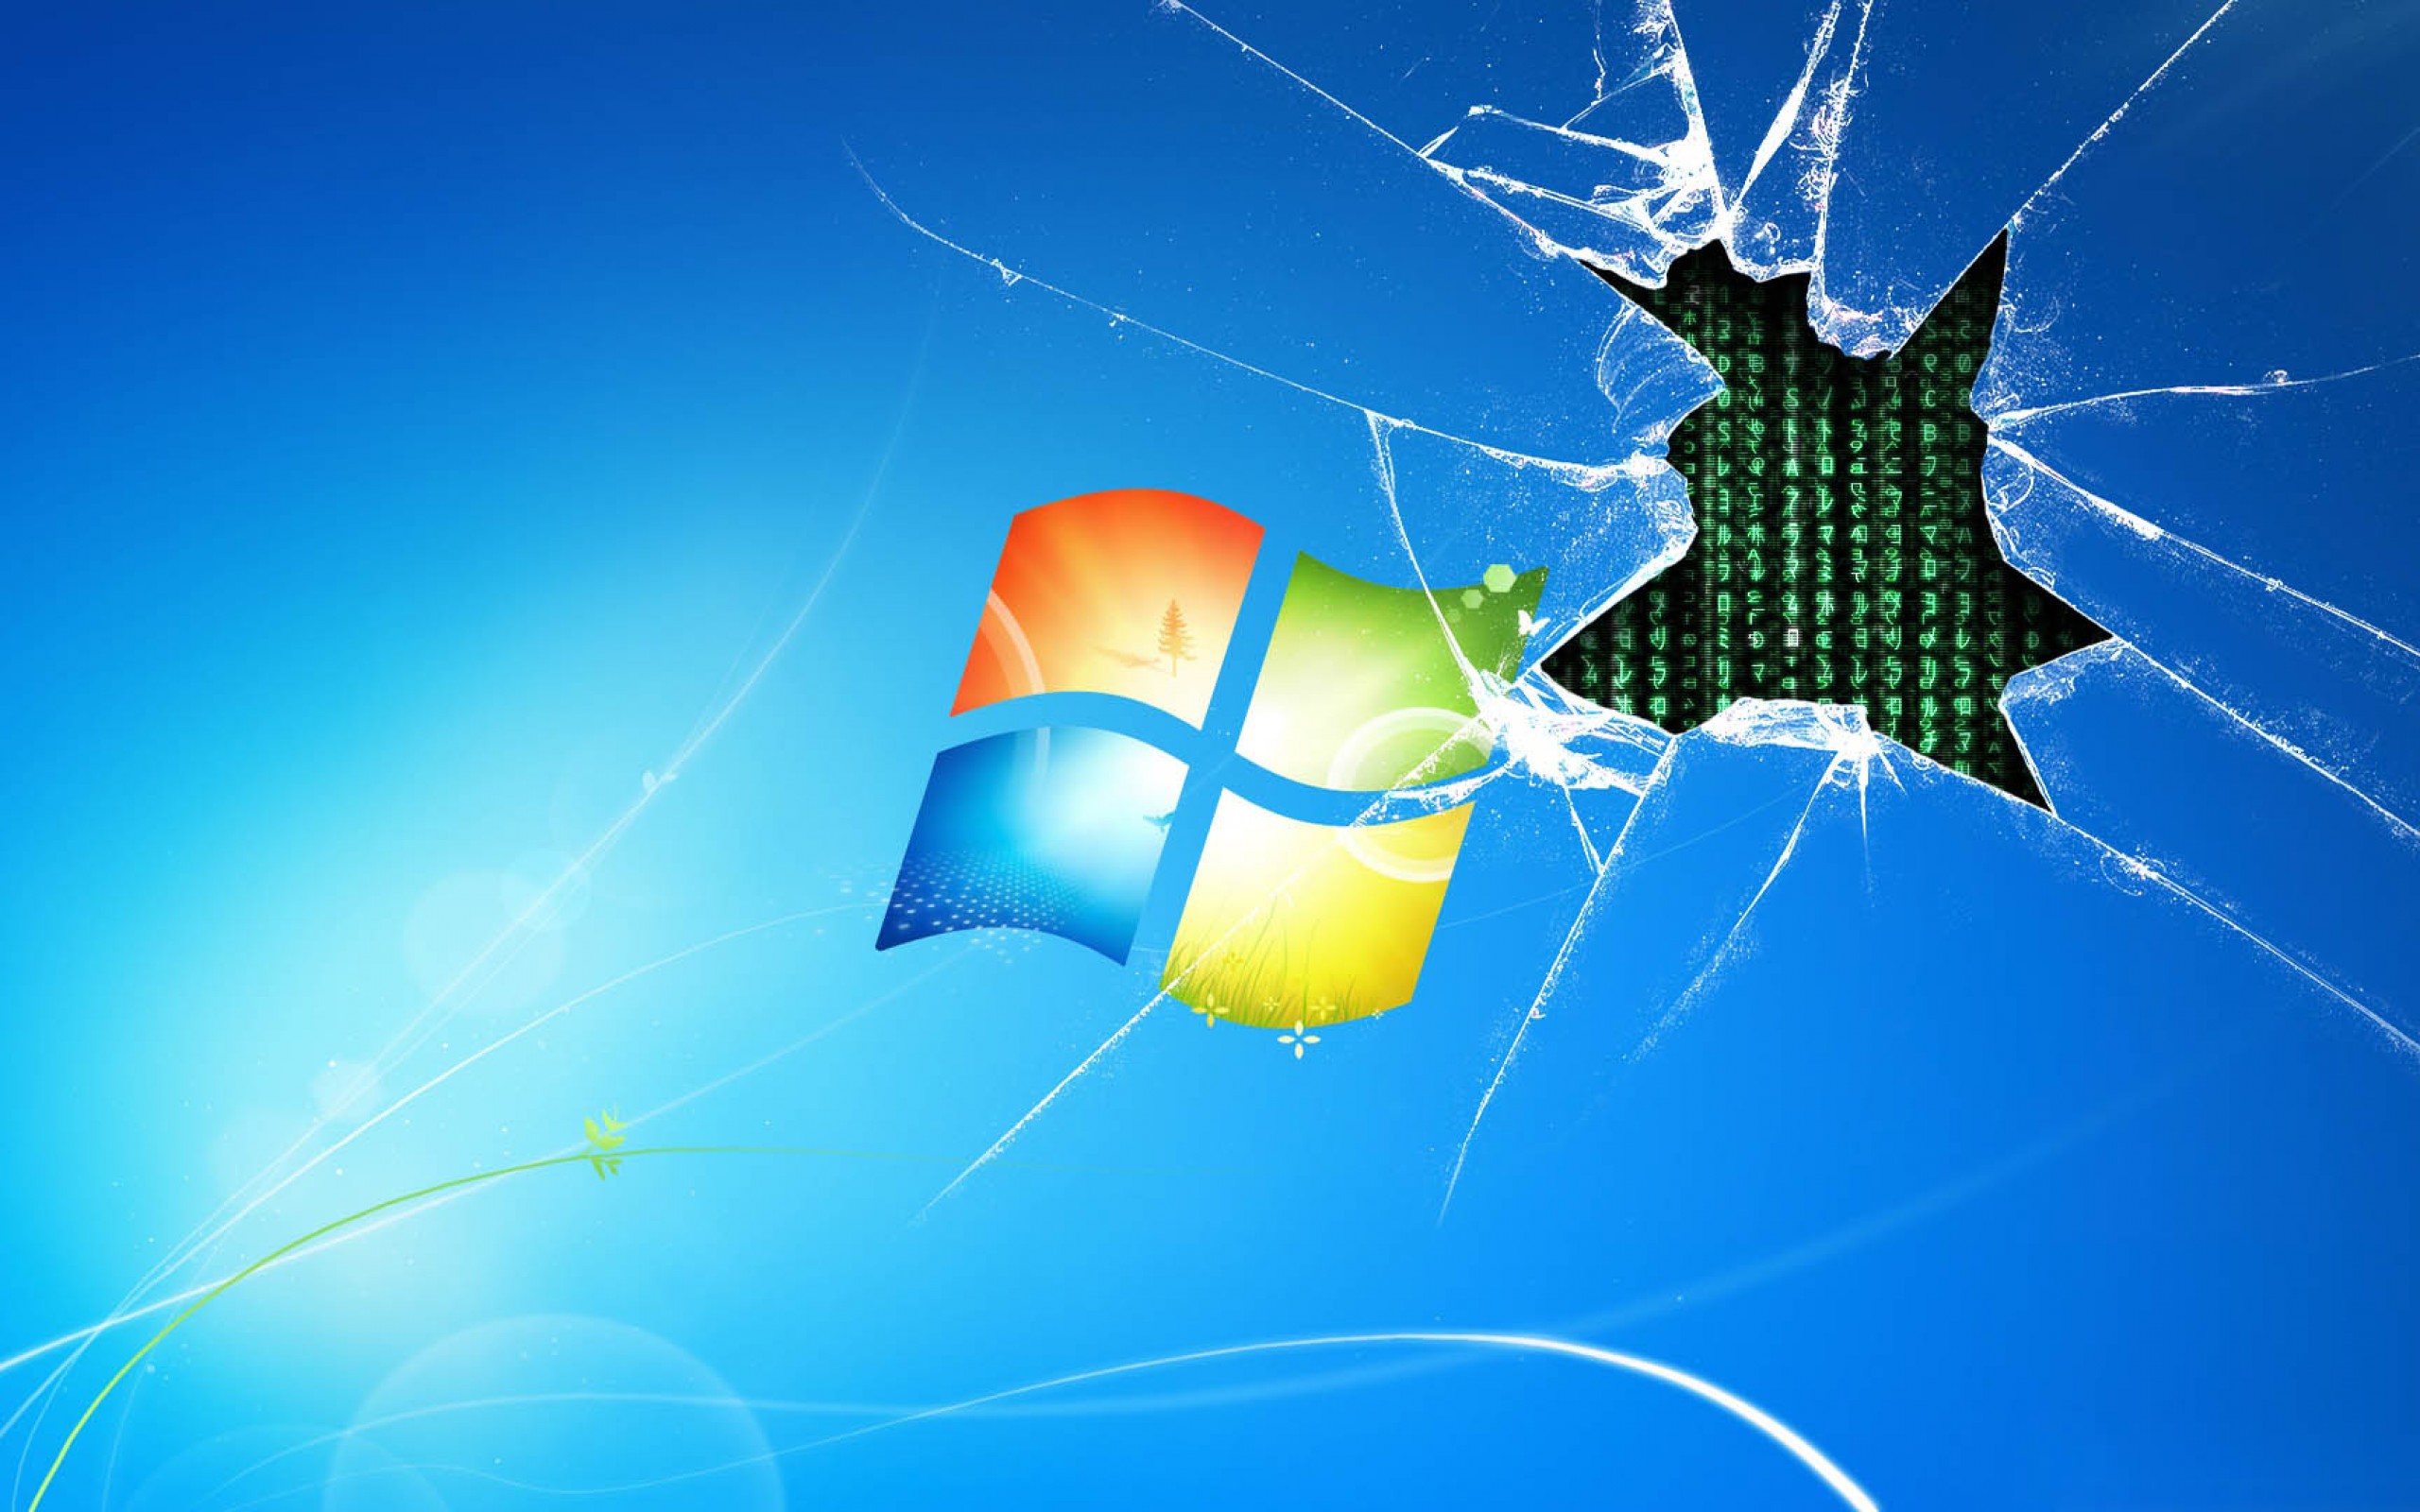 Windows Cracked Screen HD Wallpaper For Your Desktop Background Or